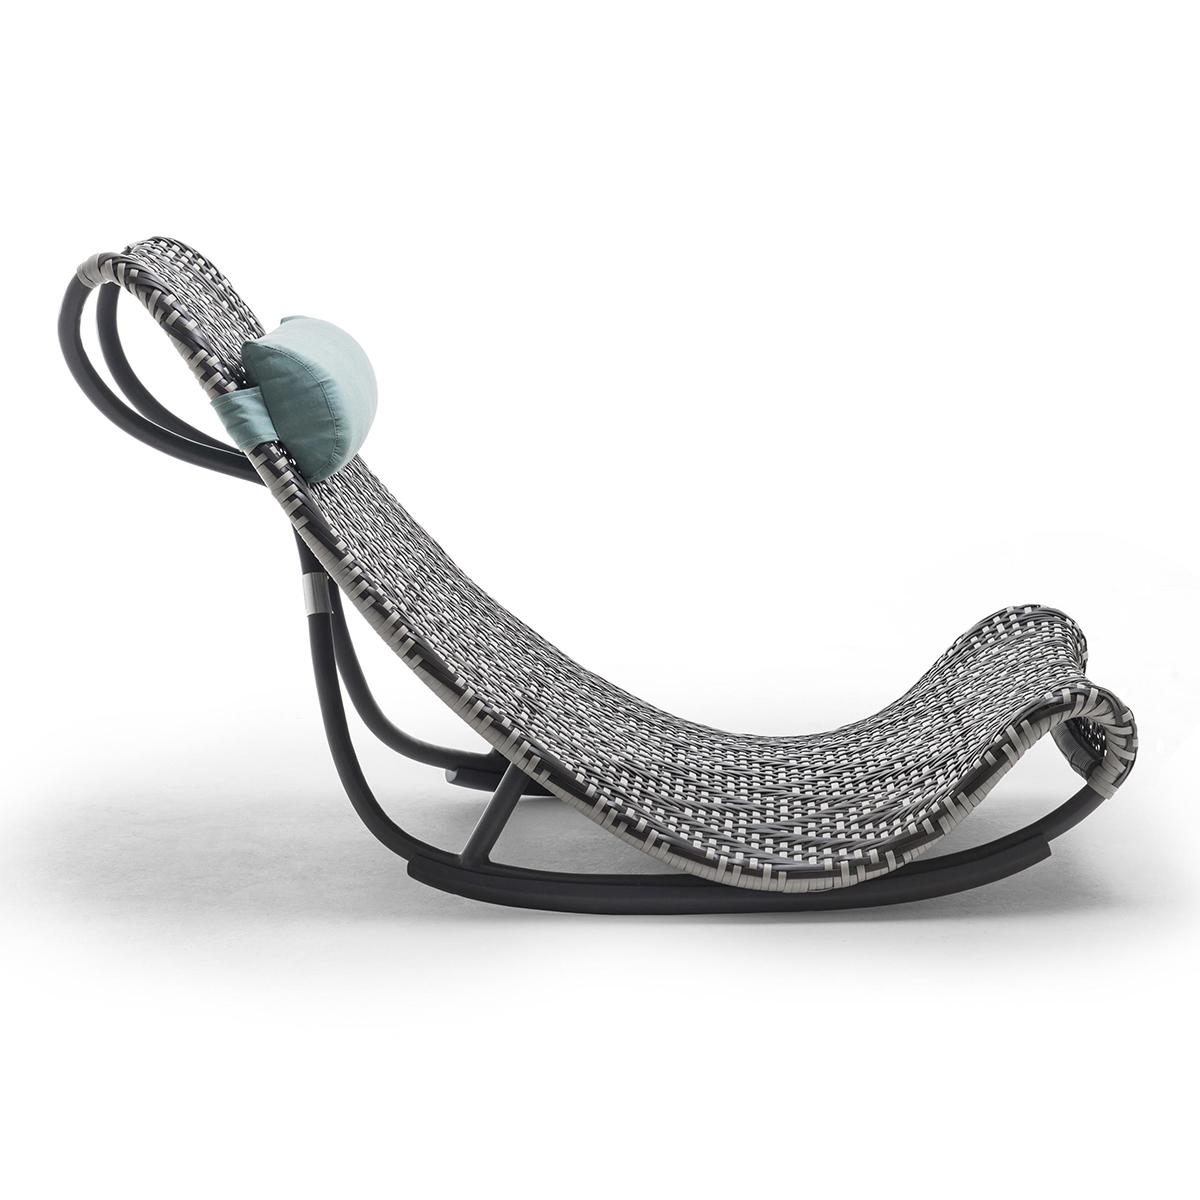 Lounger chair relax with braided
polyethylene and with aluminium
structure.
Lead time production if on stock 2-3 weeks,
if not on stock 15-16 weeks.